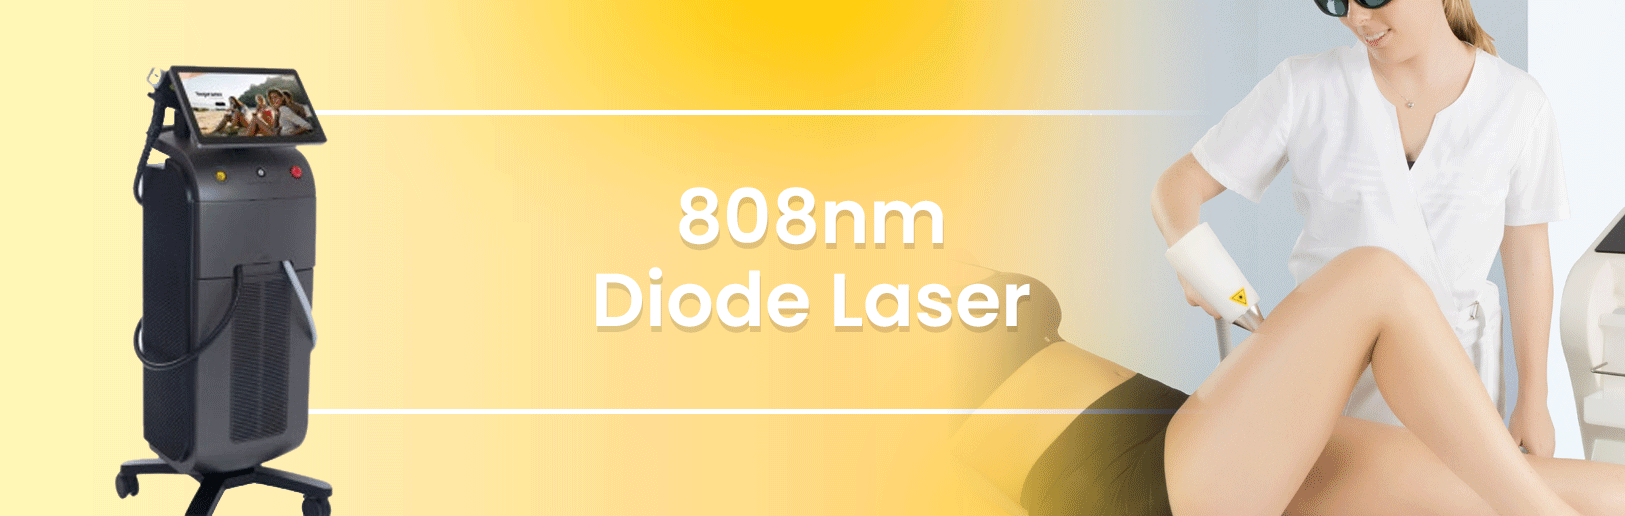 808nm Diode Laser Spare Parts